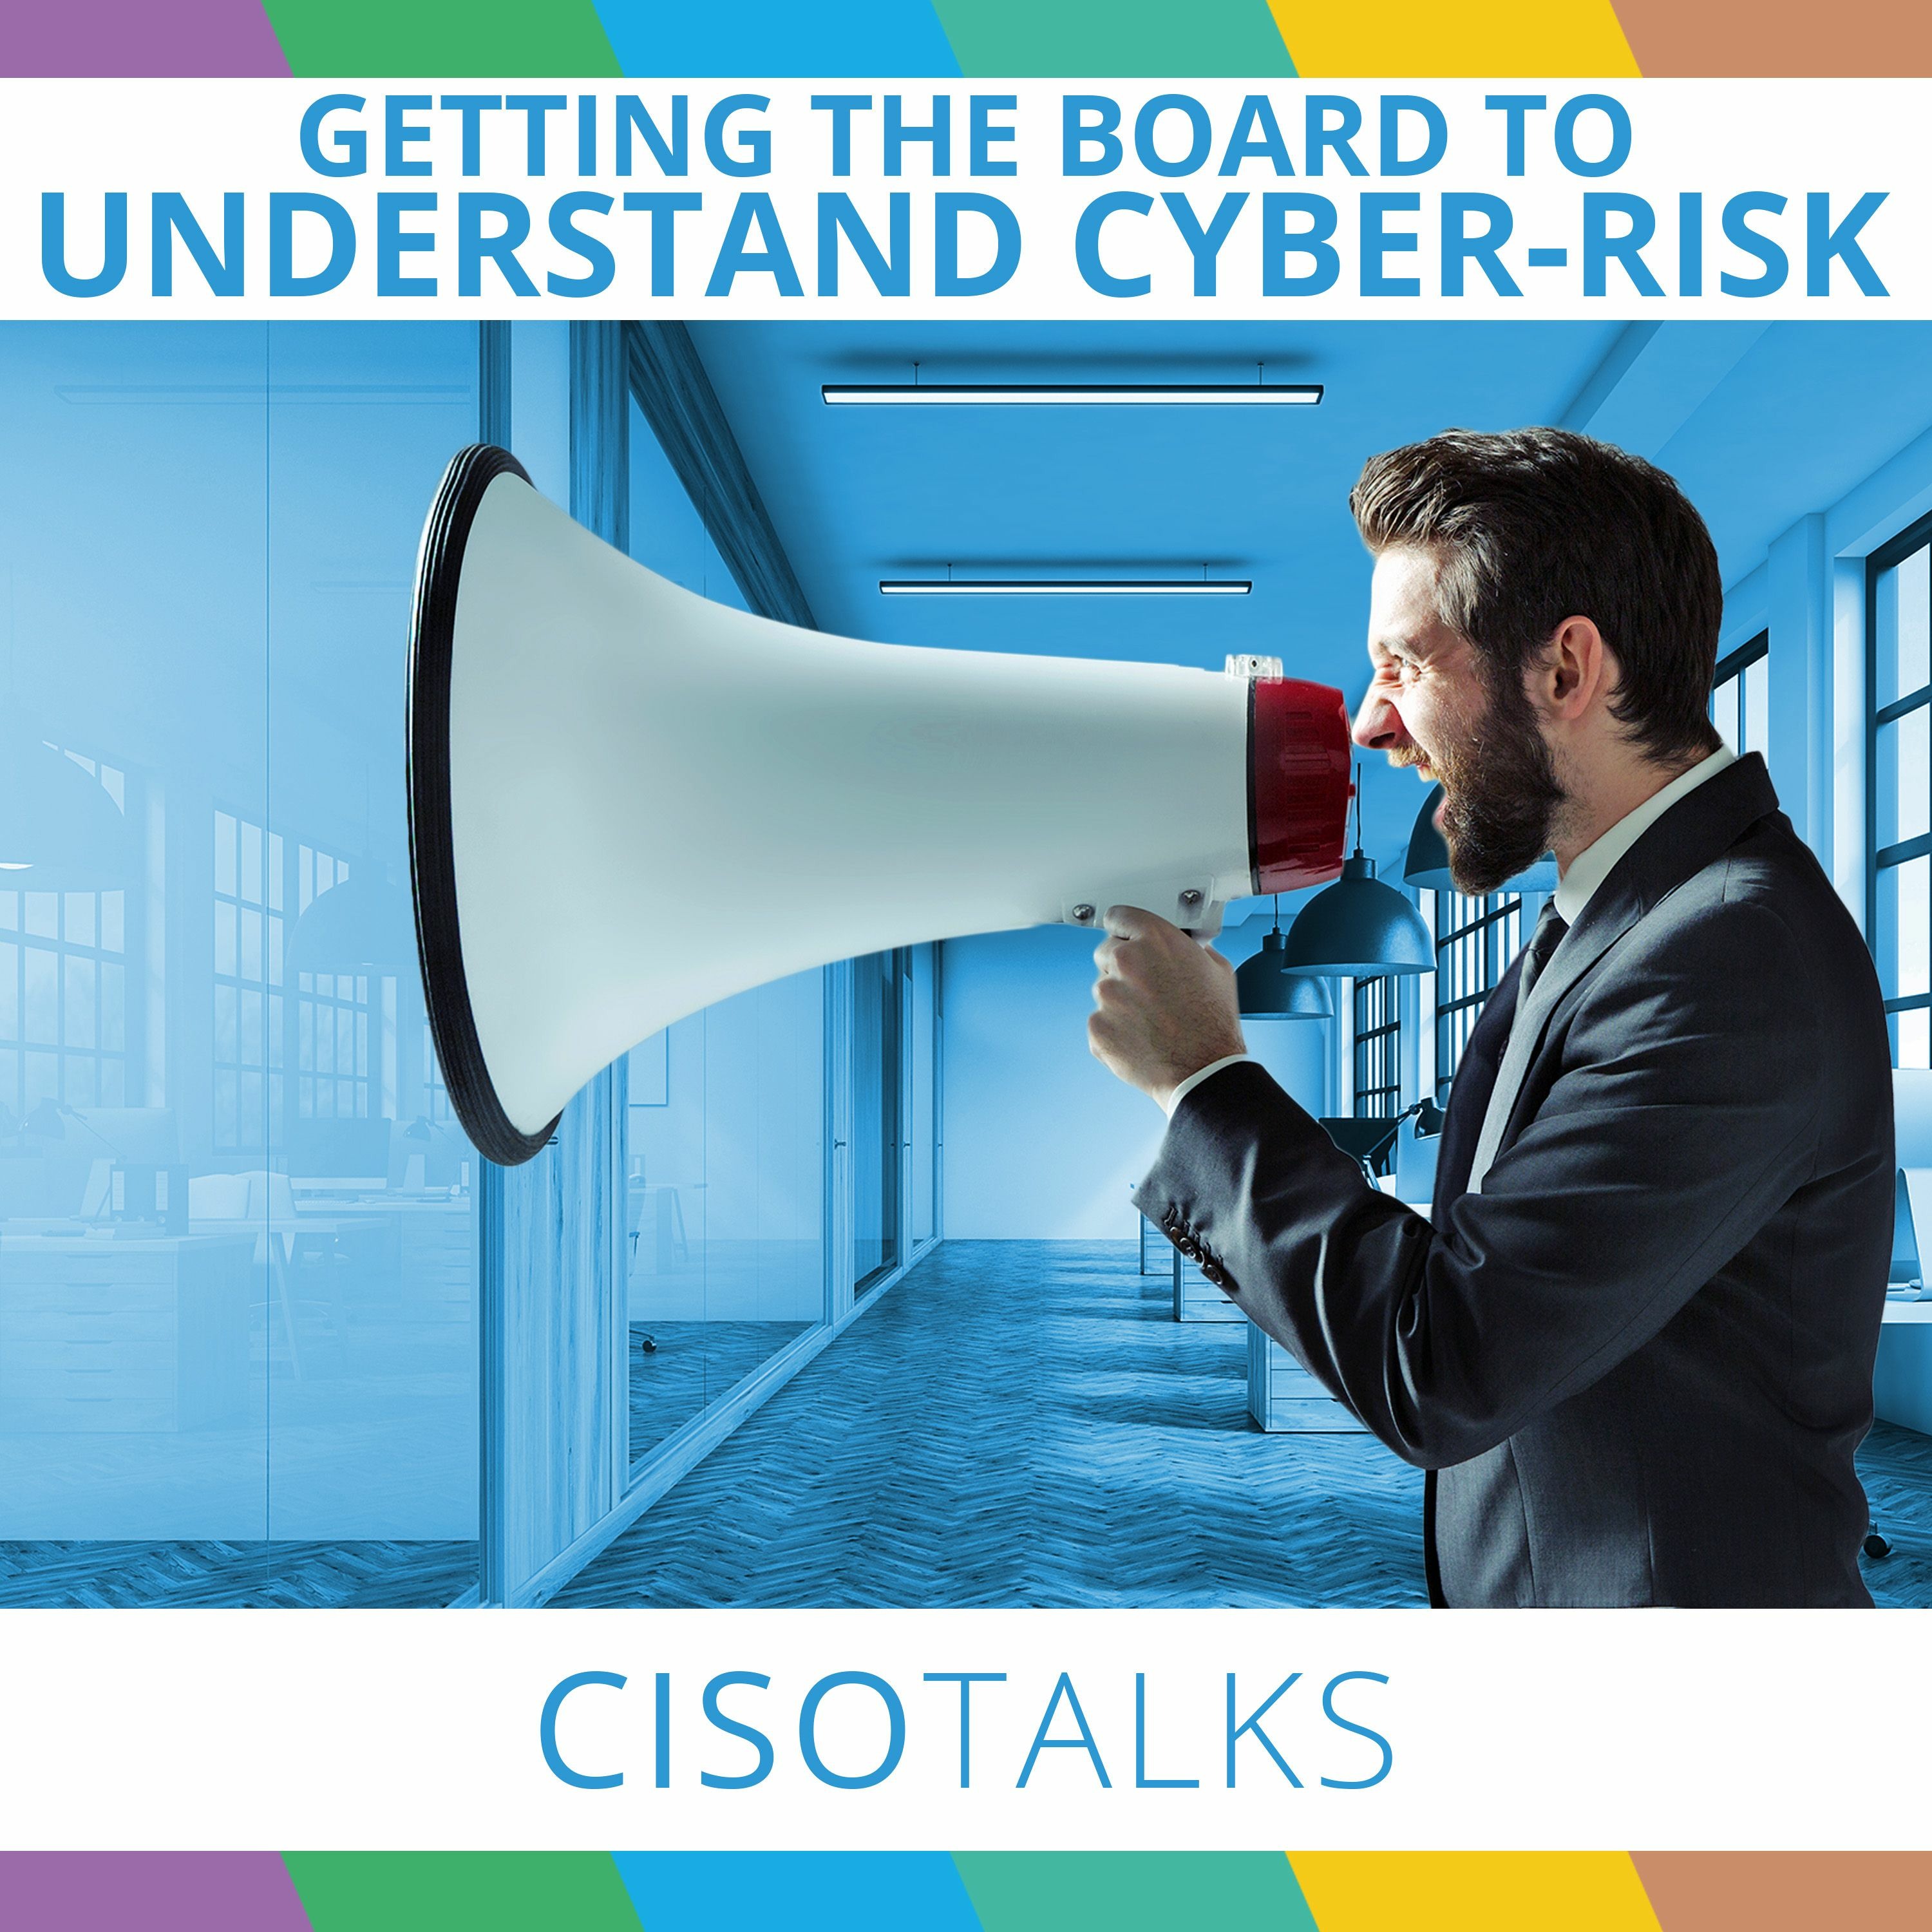 Getting The Board To Understand Cyber-Risk | CISO Talks